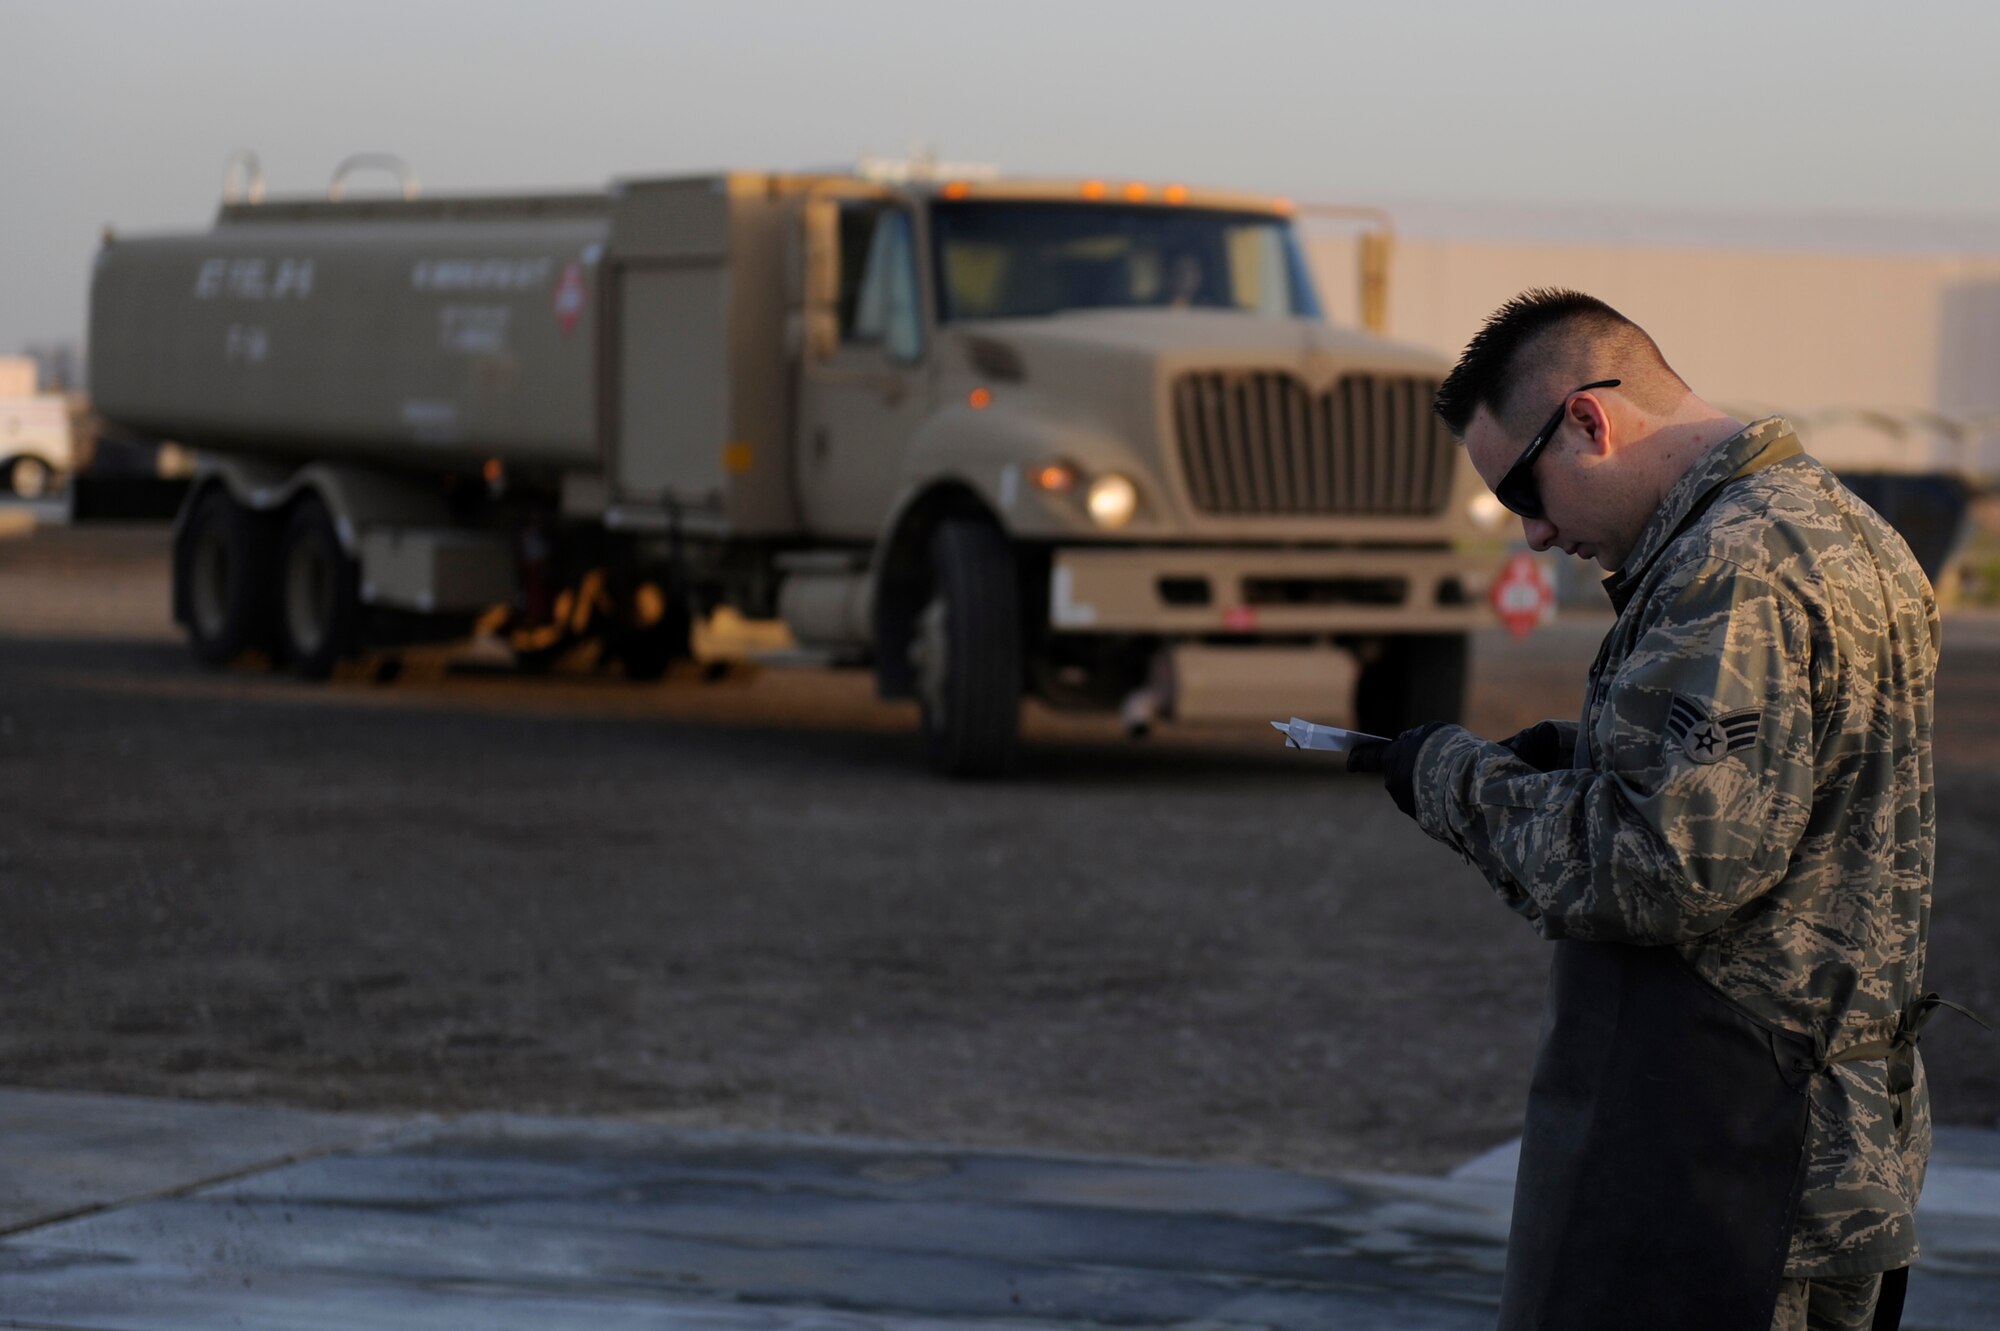 Senior Airman Brian Amos, 380th Expeditionary Logistics Readiness Squadron, fuels flight, reviews his C-man checklist prior to a fuel checkpoint operation on an R-11 fuel truck at an undisclosed location in Southwest Asia, April 4. Airman Amos is deployed from Nellis AFB, Nev. and hails from Las Vegas, Nev. (U.S. Air Force photo by Senior Airman Brian J. Ellis) (Released)